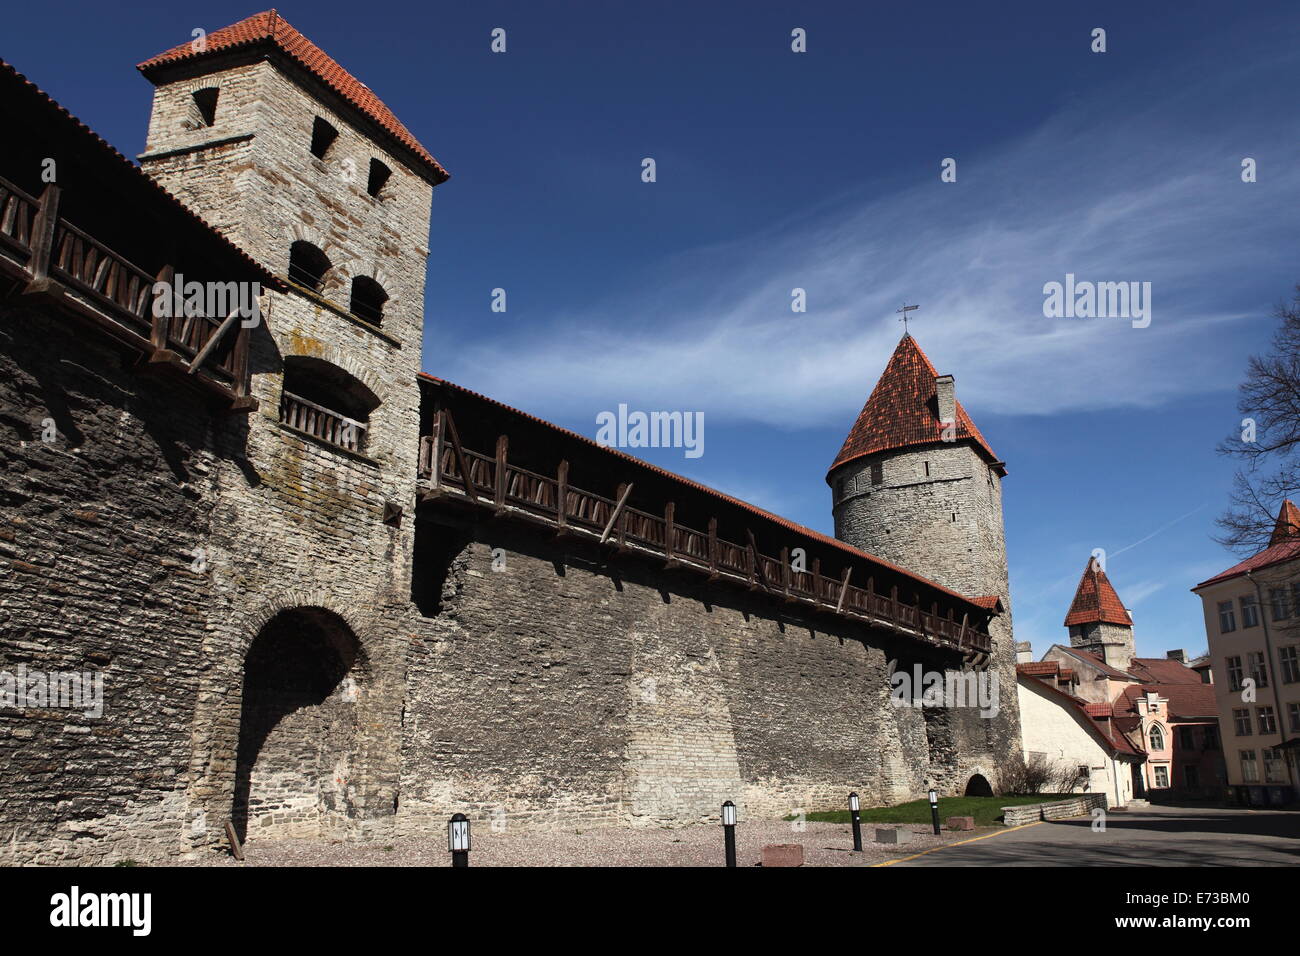 Medieval towers and city walls in the Old Town of Tallinn, UNESCO World Heritage Site, Estonia, Europe Stock Photo